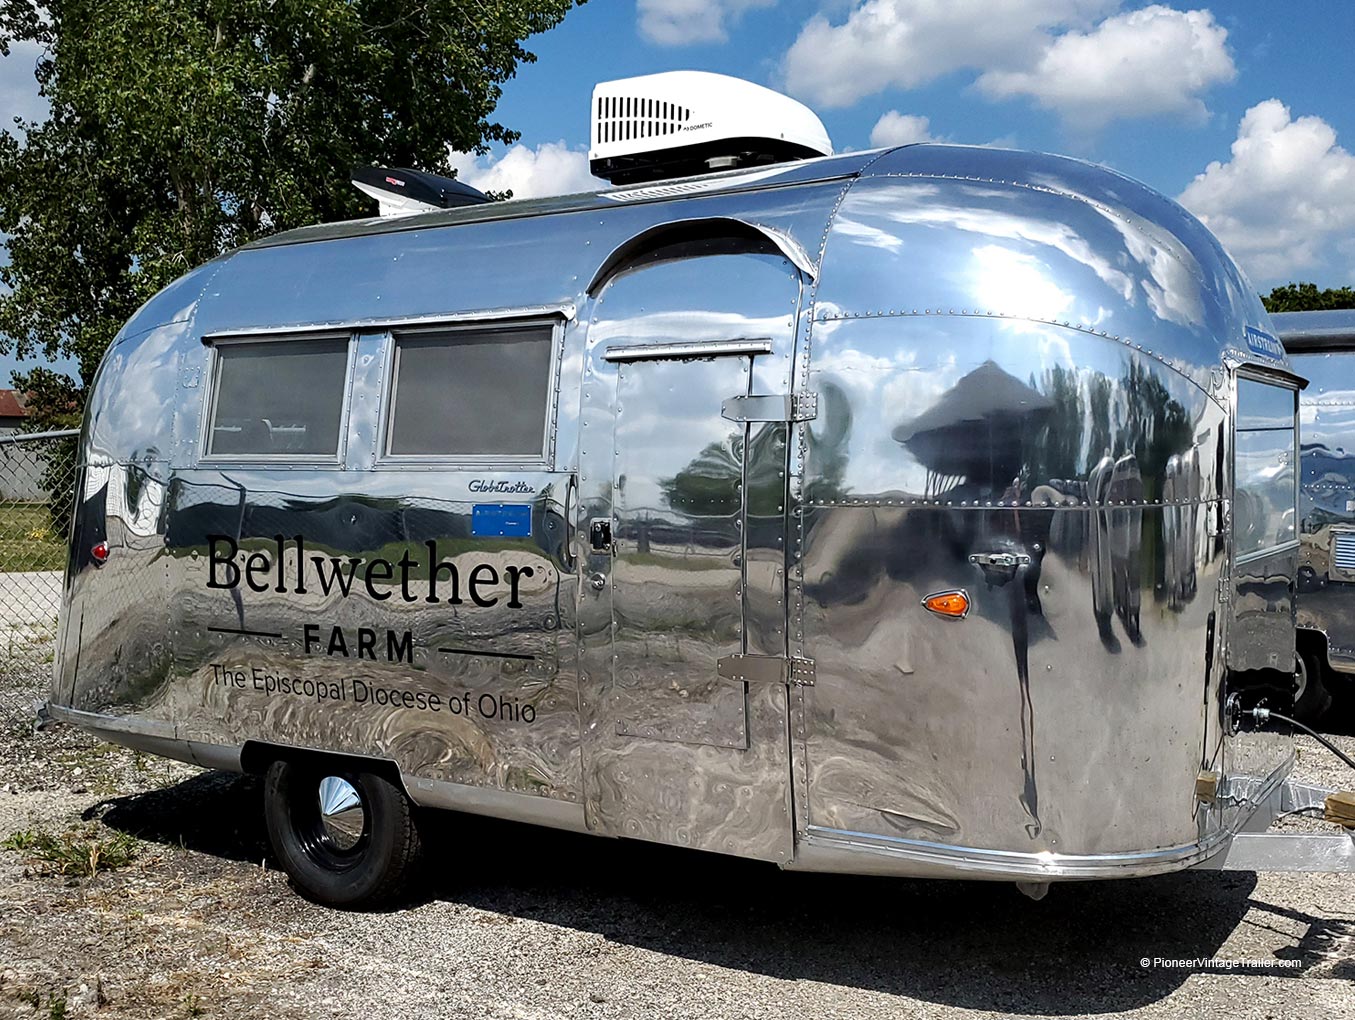 Bellwether Farm soup/sandwich Airstream serving trailer